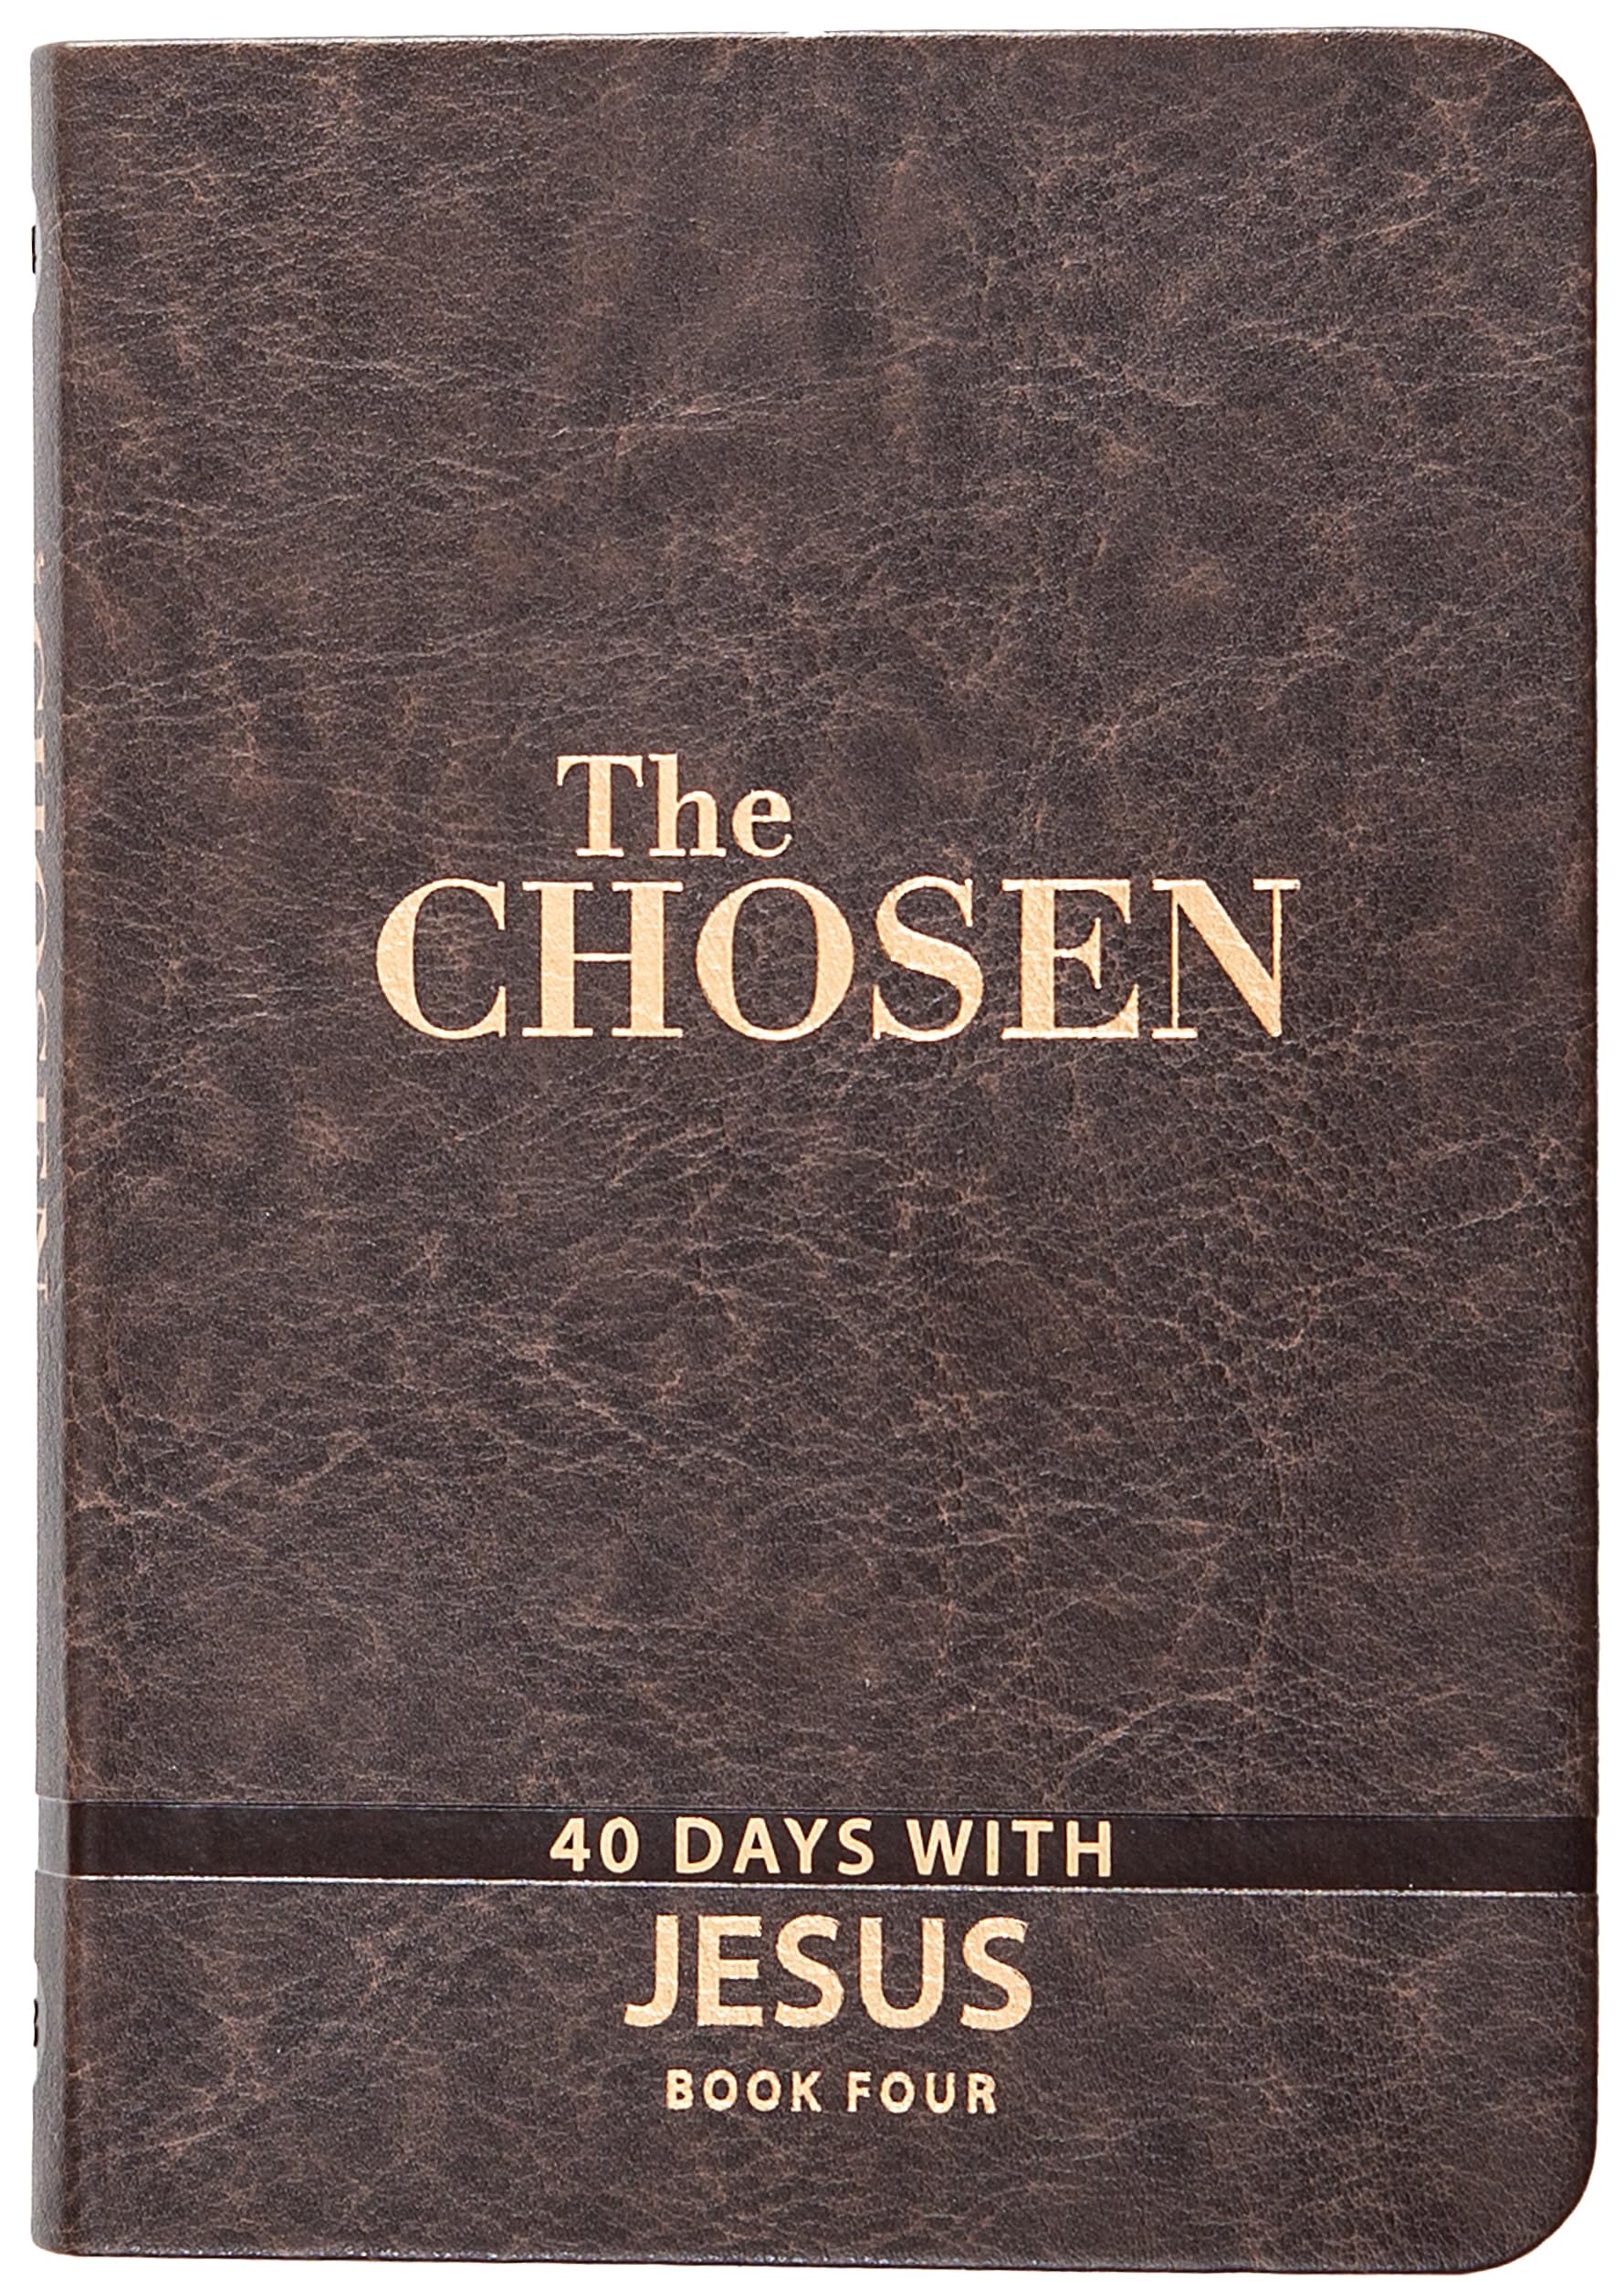 The Chosen Book Four: 40 Days with Jesus by Jenkins, Amanda